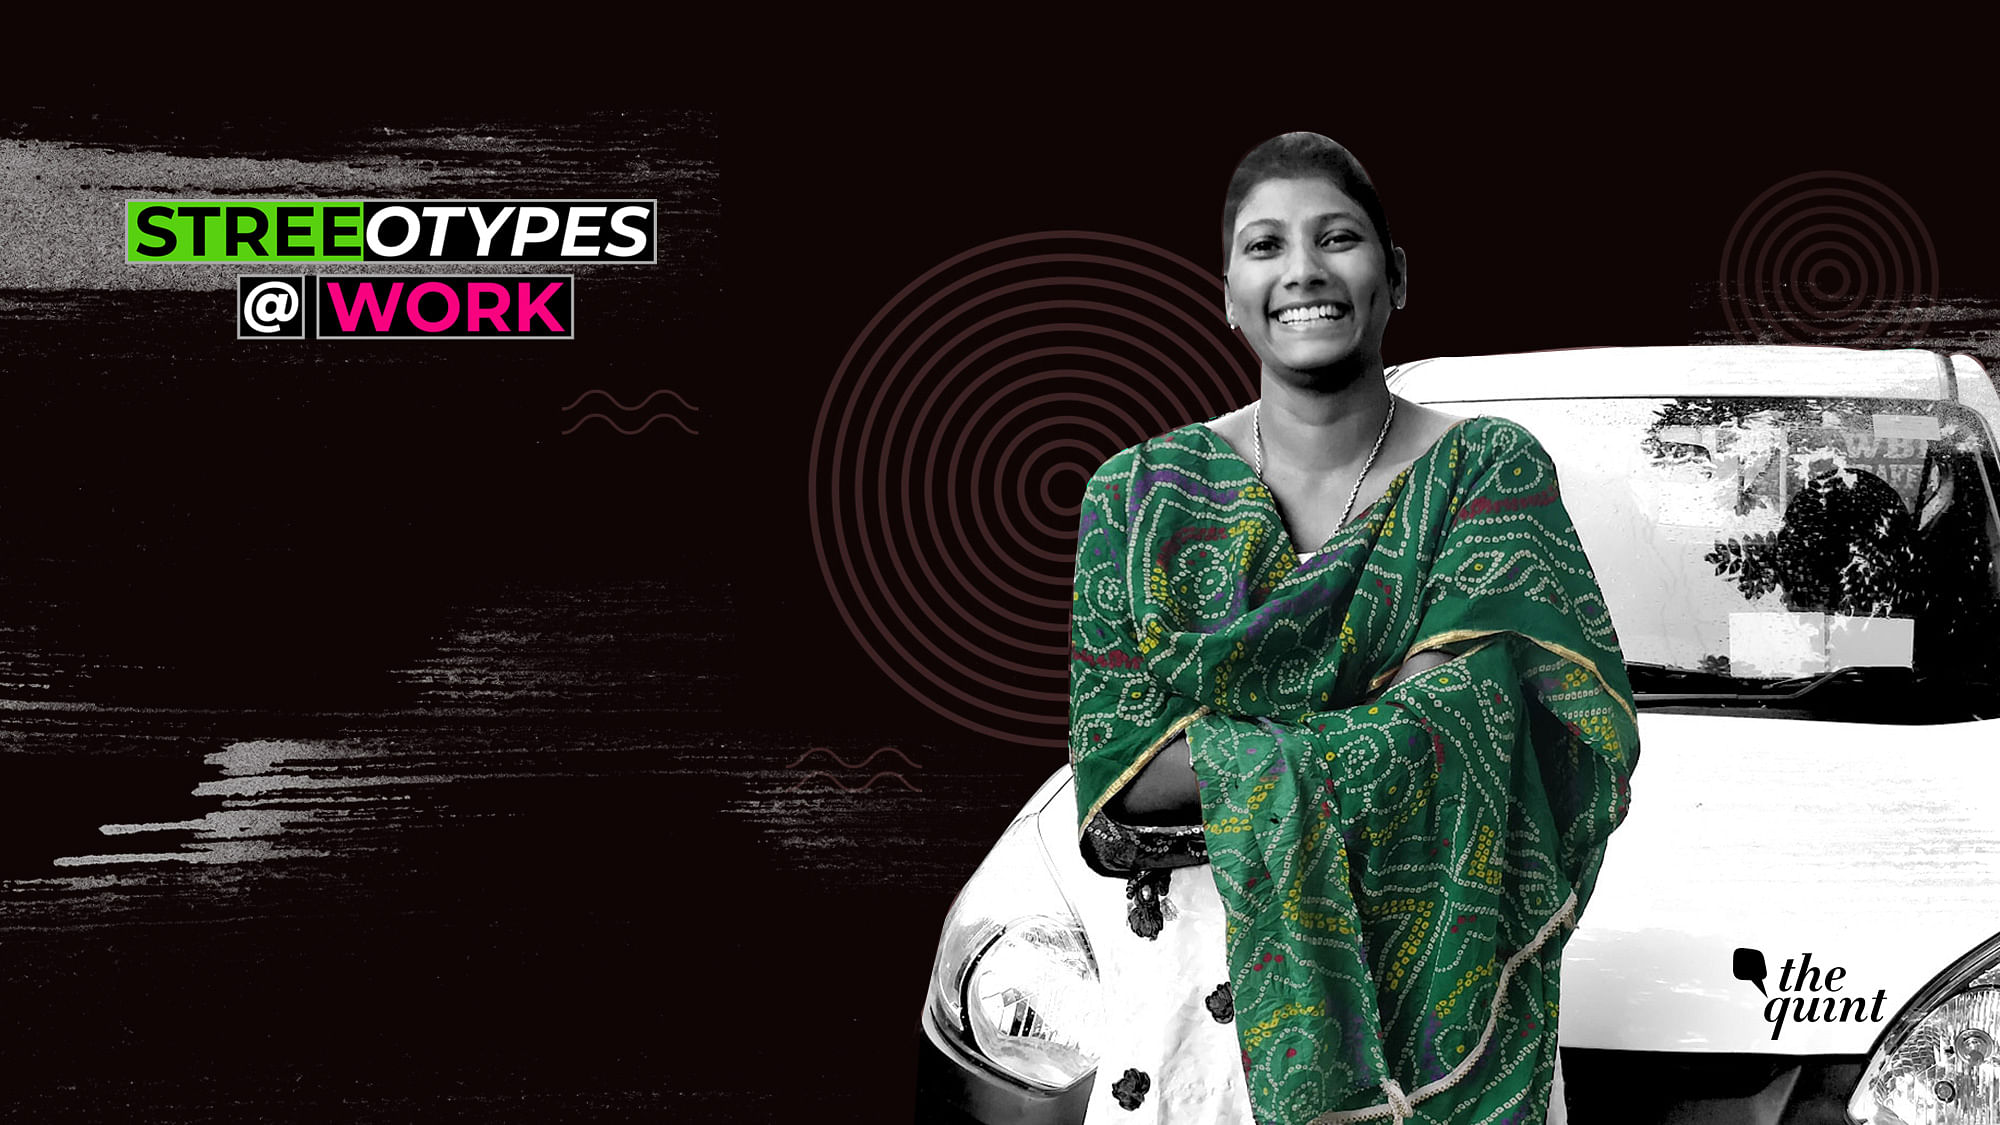 28-year-old Sushma is Uber’s only female driver partner in Kolkata.